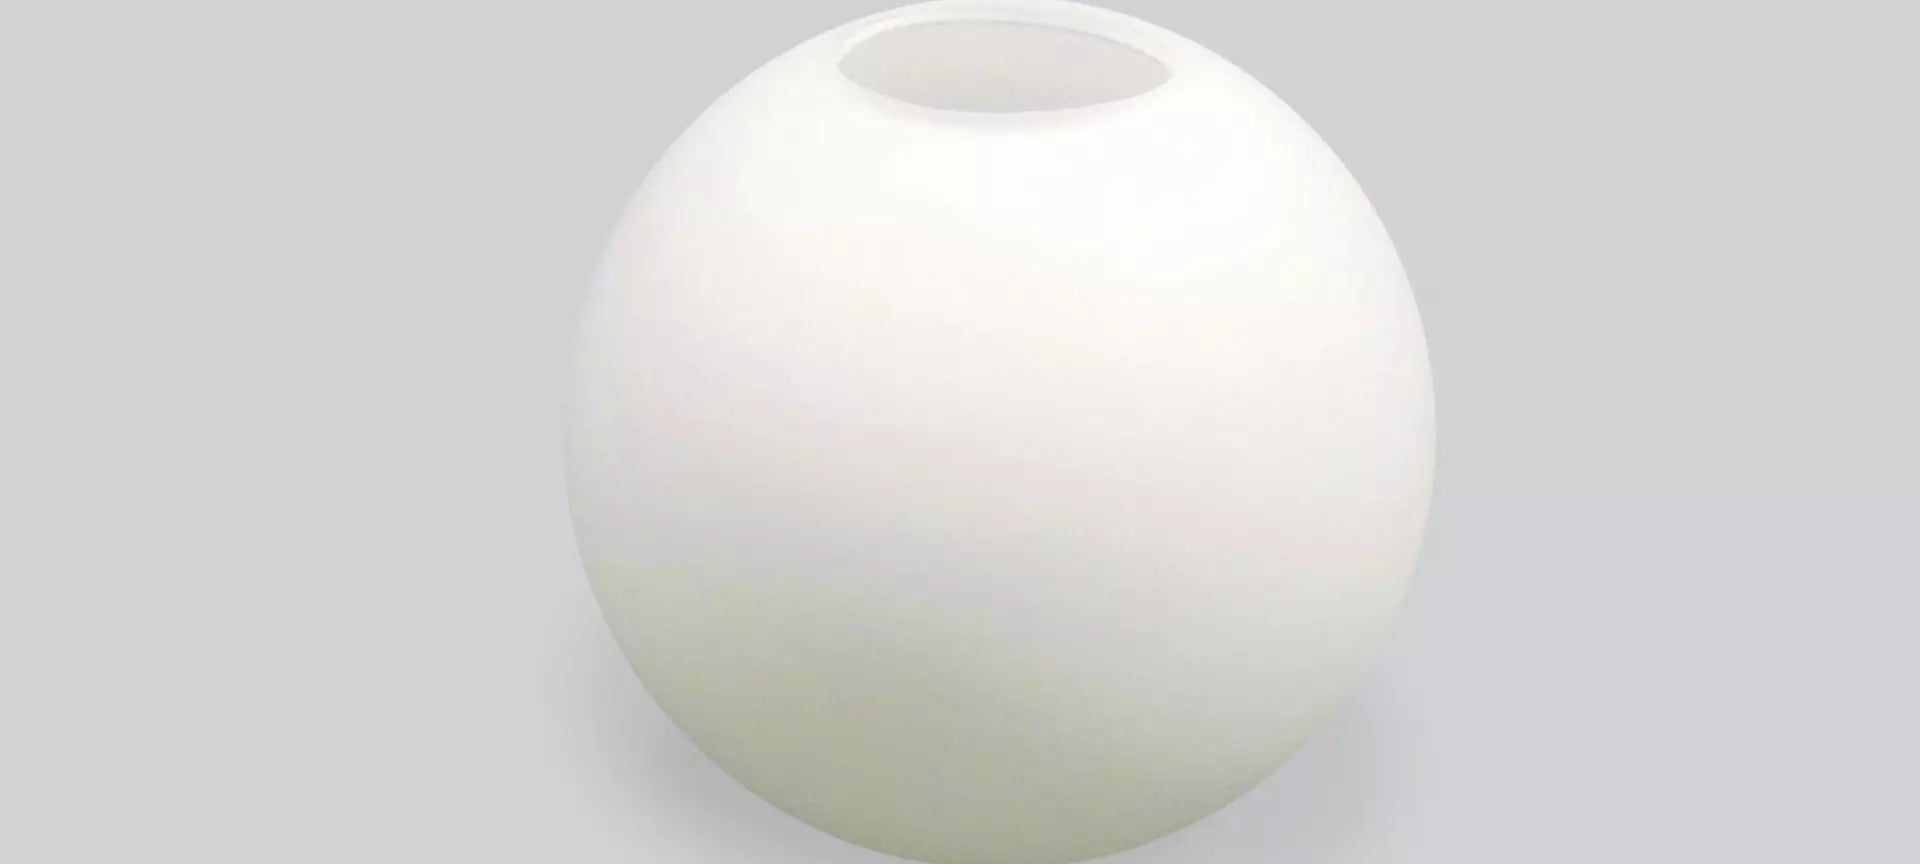 Spare part Snowball glass shade